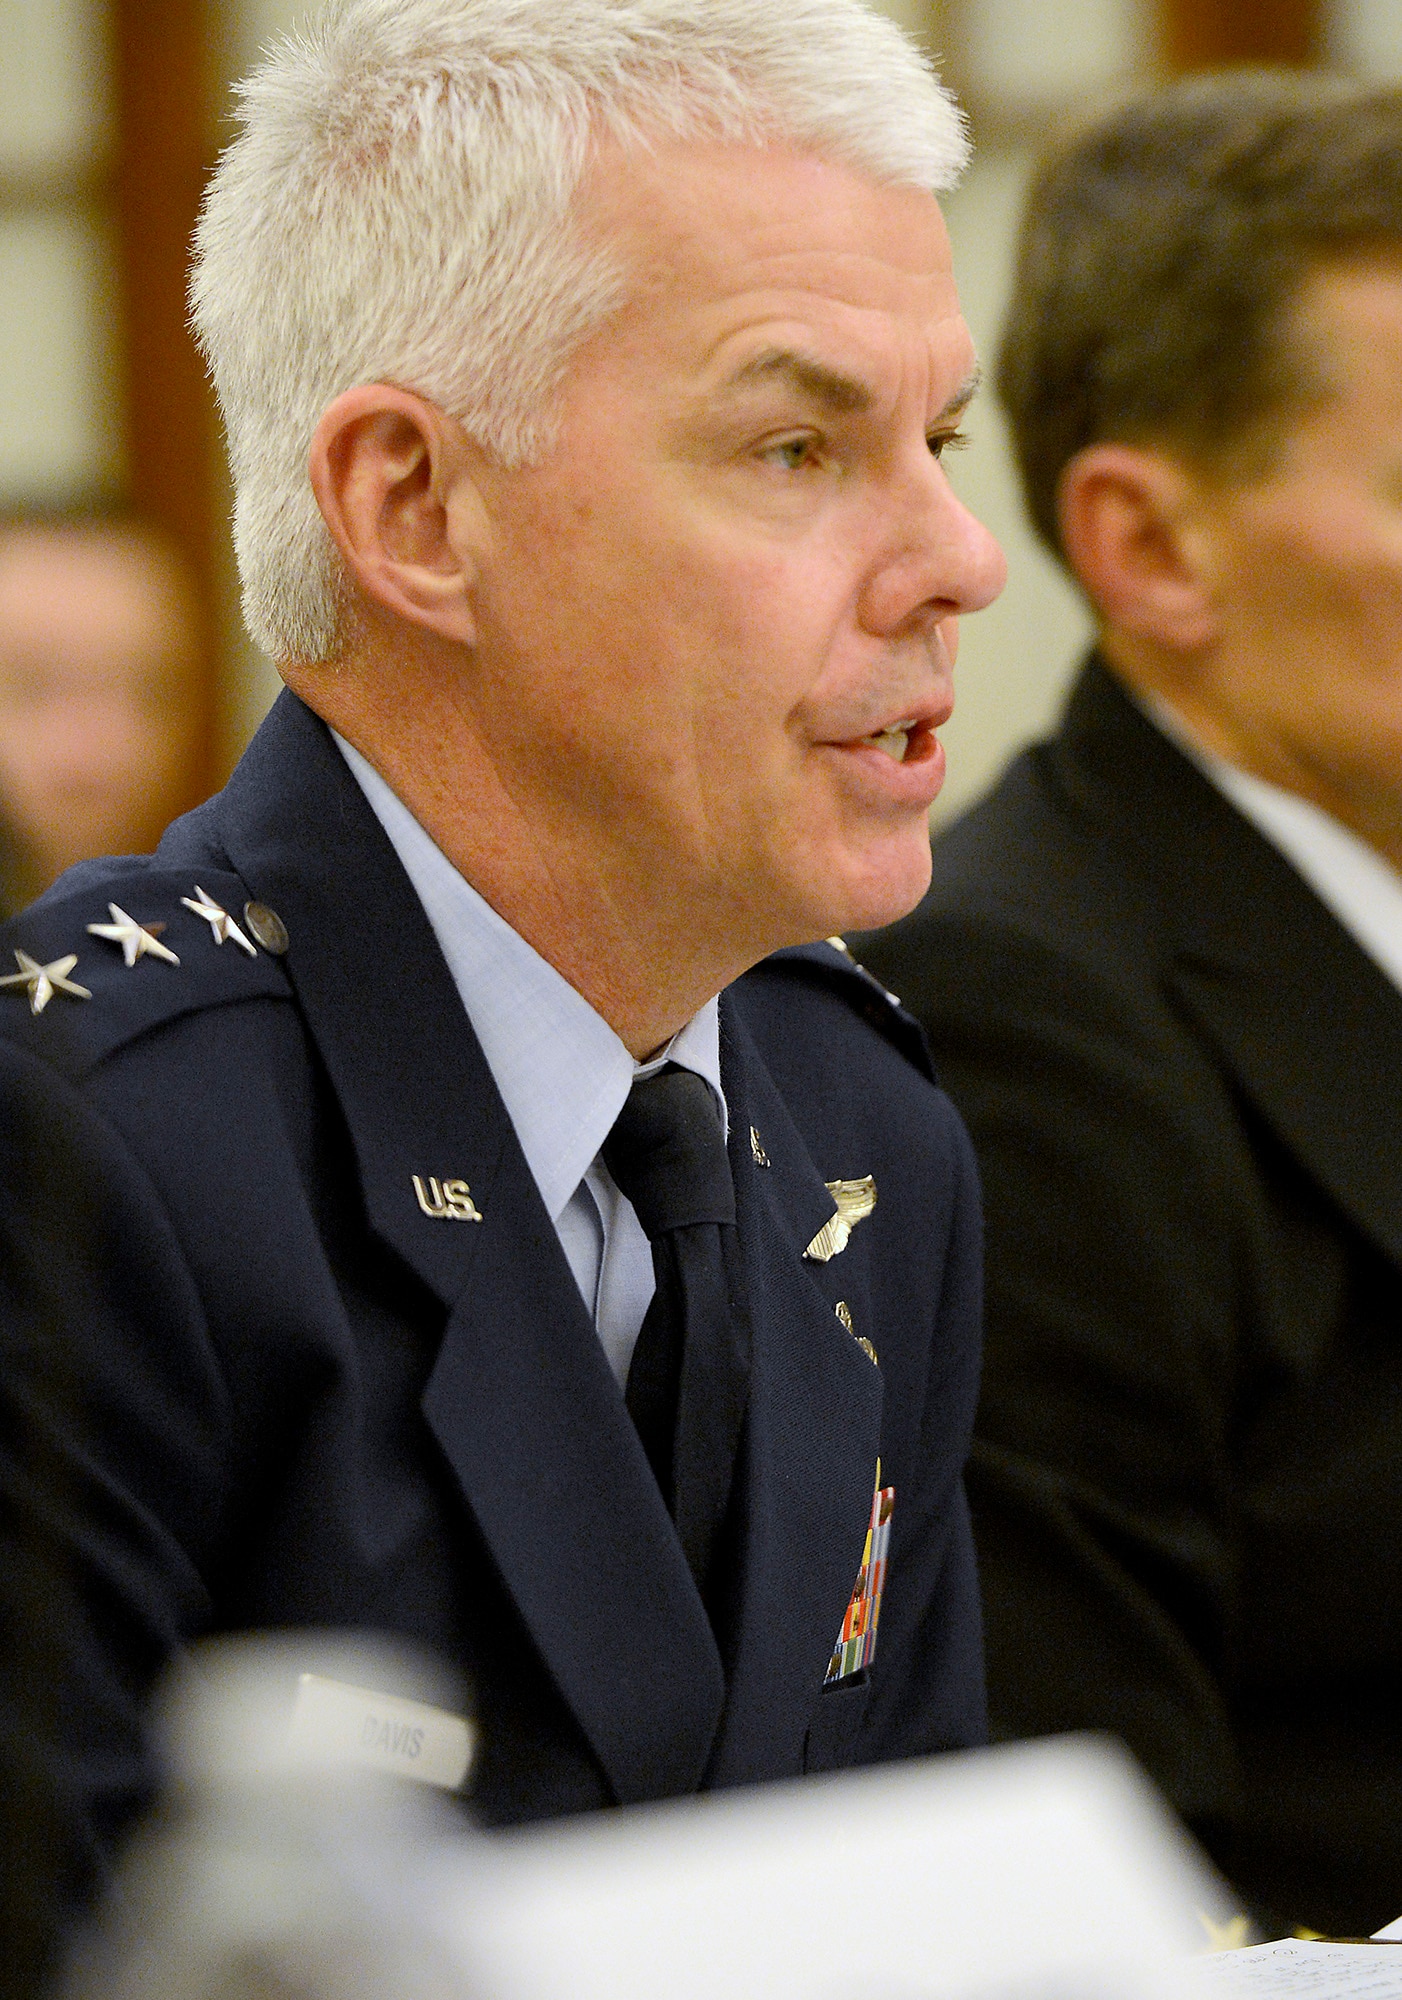 Lt. Gen. Charles R. Davis testifies April 8, 2014, before the Senate Subcommittee on Air and Land in Washington, D.C.  Witnesses from other services at the hearing included Lt. Gen. Christopher C. Bogden, U.S. Air Force Program Executive officer, F-35 Lightning II Joint Program Office; Vice Adm. Paul A. Grosklags, Principal Military Deputy to the Assistant Secretary of the Navy for Research, Development and Acquisition; and Lt. Gen. Robert E. Schmidle Jr., Deputy Commandant of the Marine Corps for Aviation. Davis is the Military Deputy to the Assistant Secretary of the Air Force for Acquisition. (U.S. Air Force photo/Scott M. Ash) 